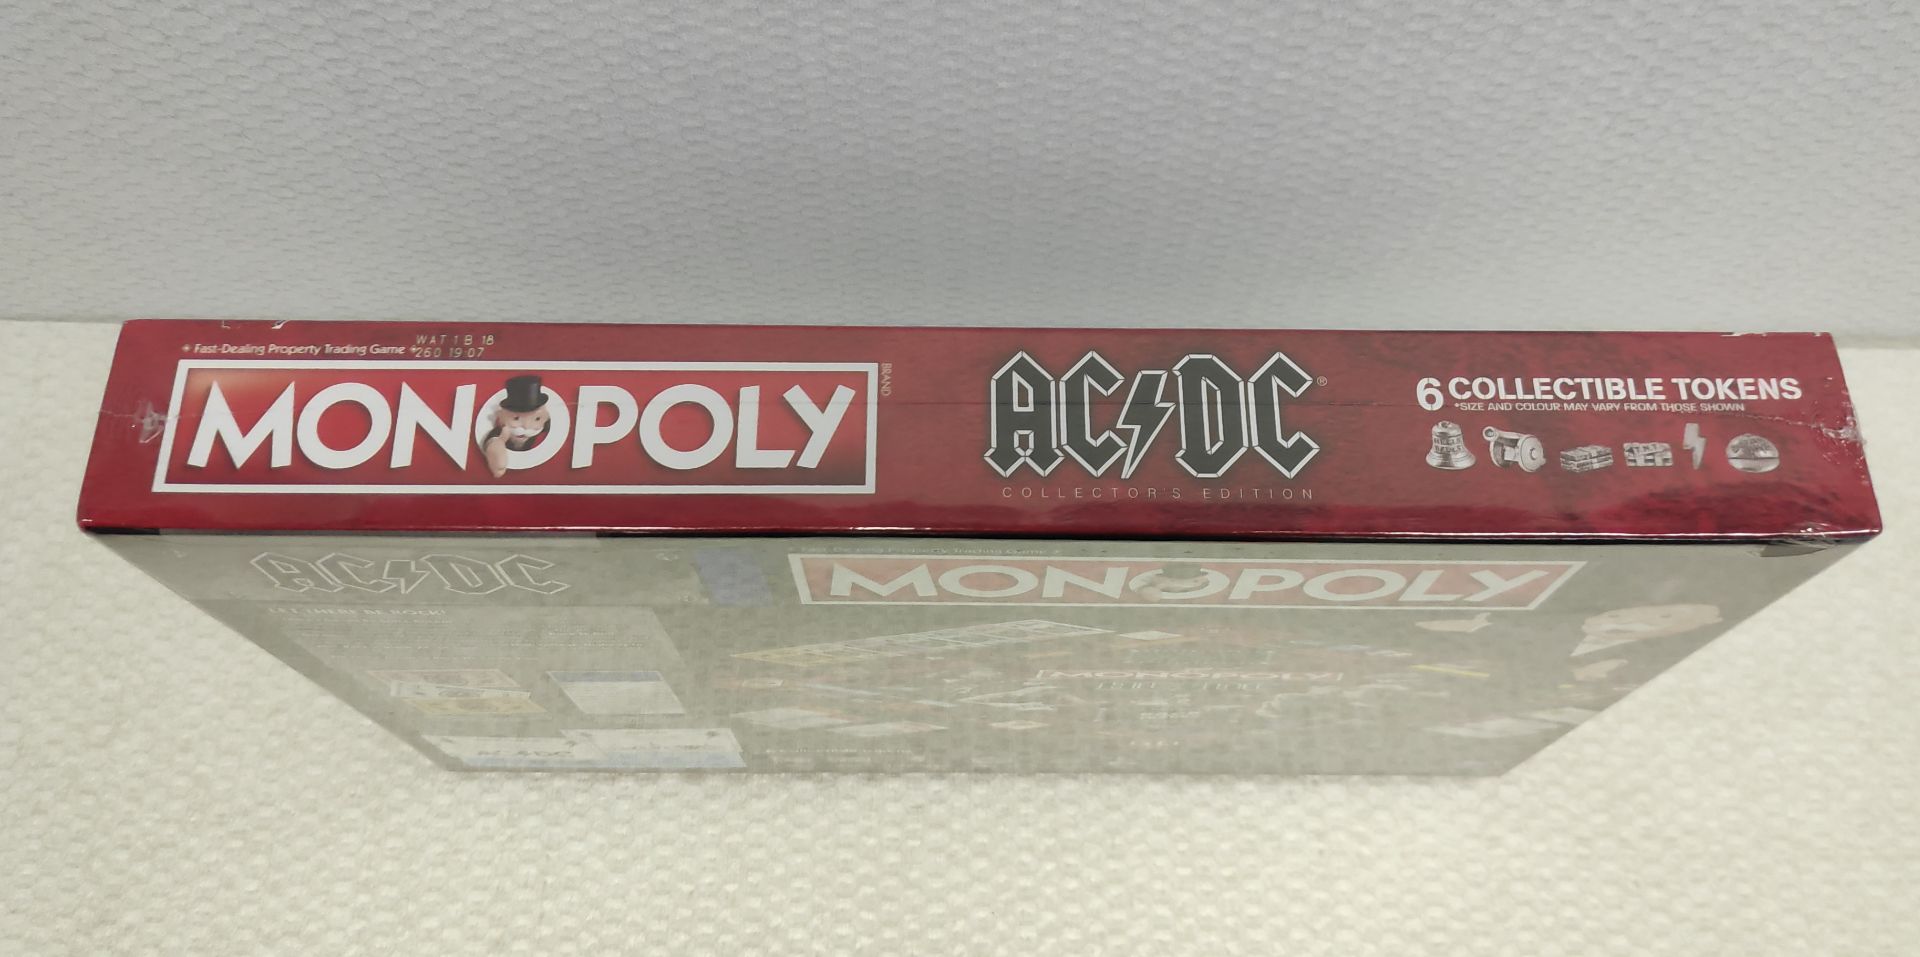 1 x AC/DC Collector's Edition Monopoly - New/Sealed - HTYS169 - CL720 - Location: Altrincham WA14<BR - Image 8 of 8